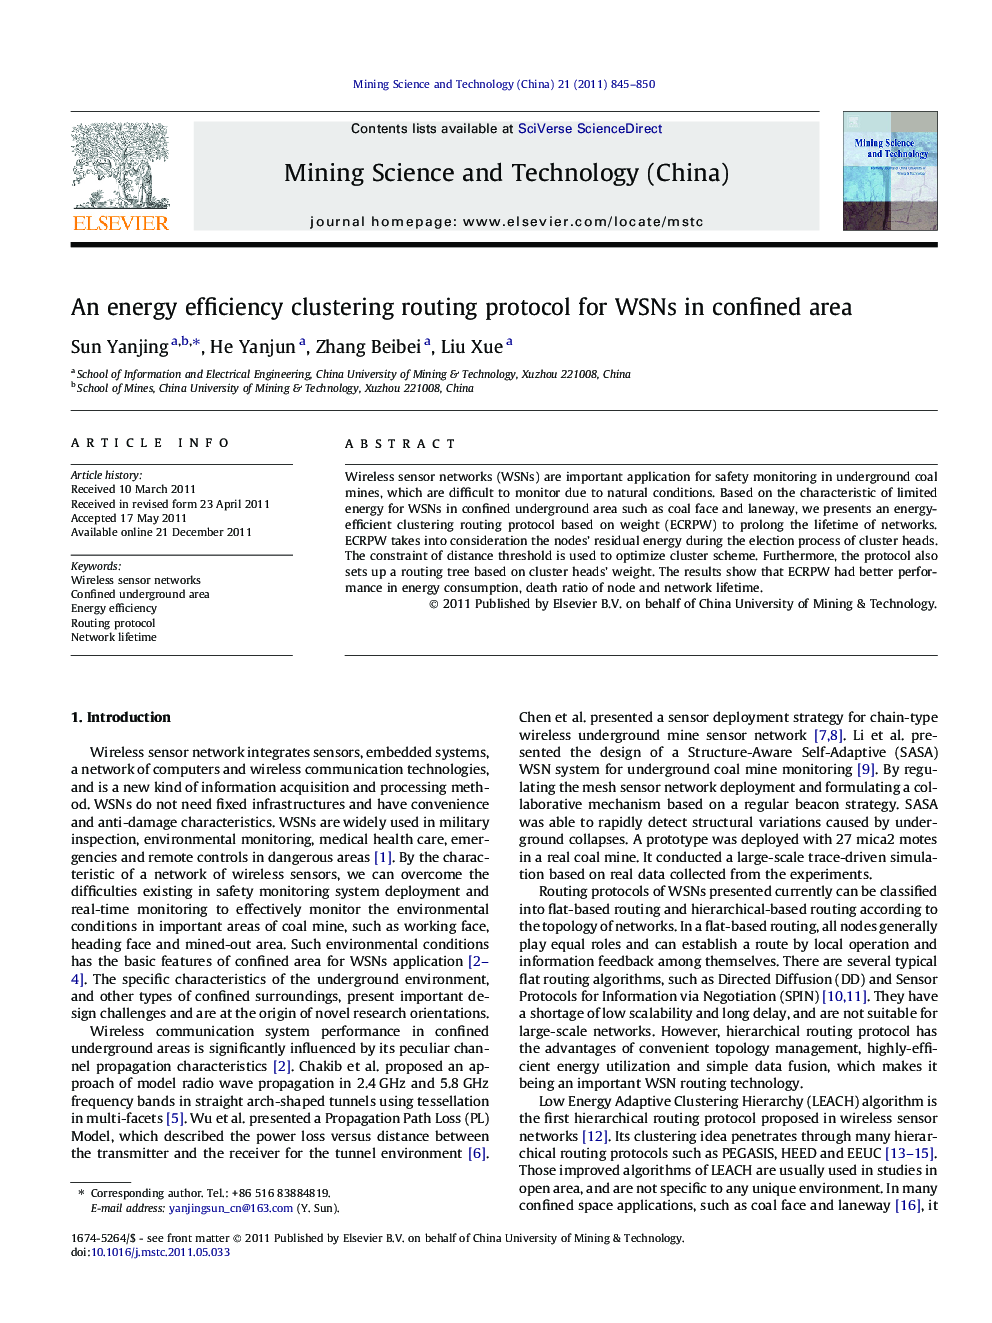 An energy efficiency clustering routing protocol for WSNs in confined area